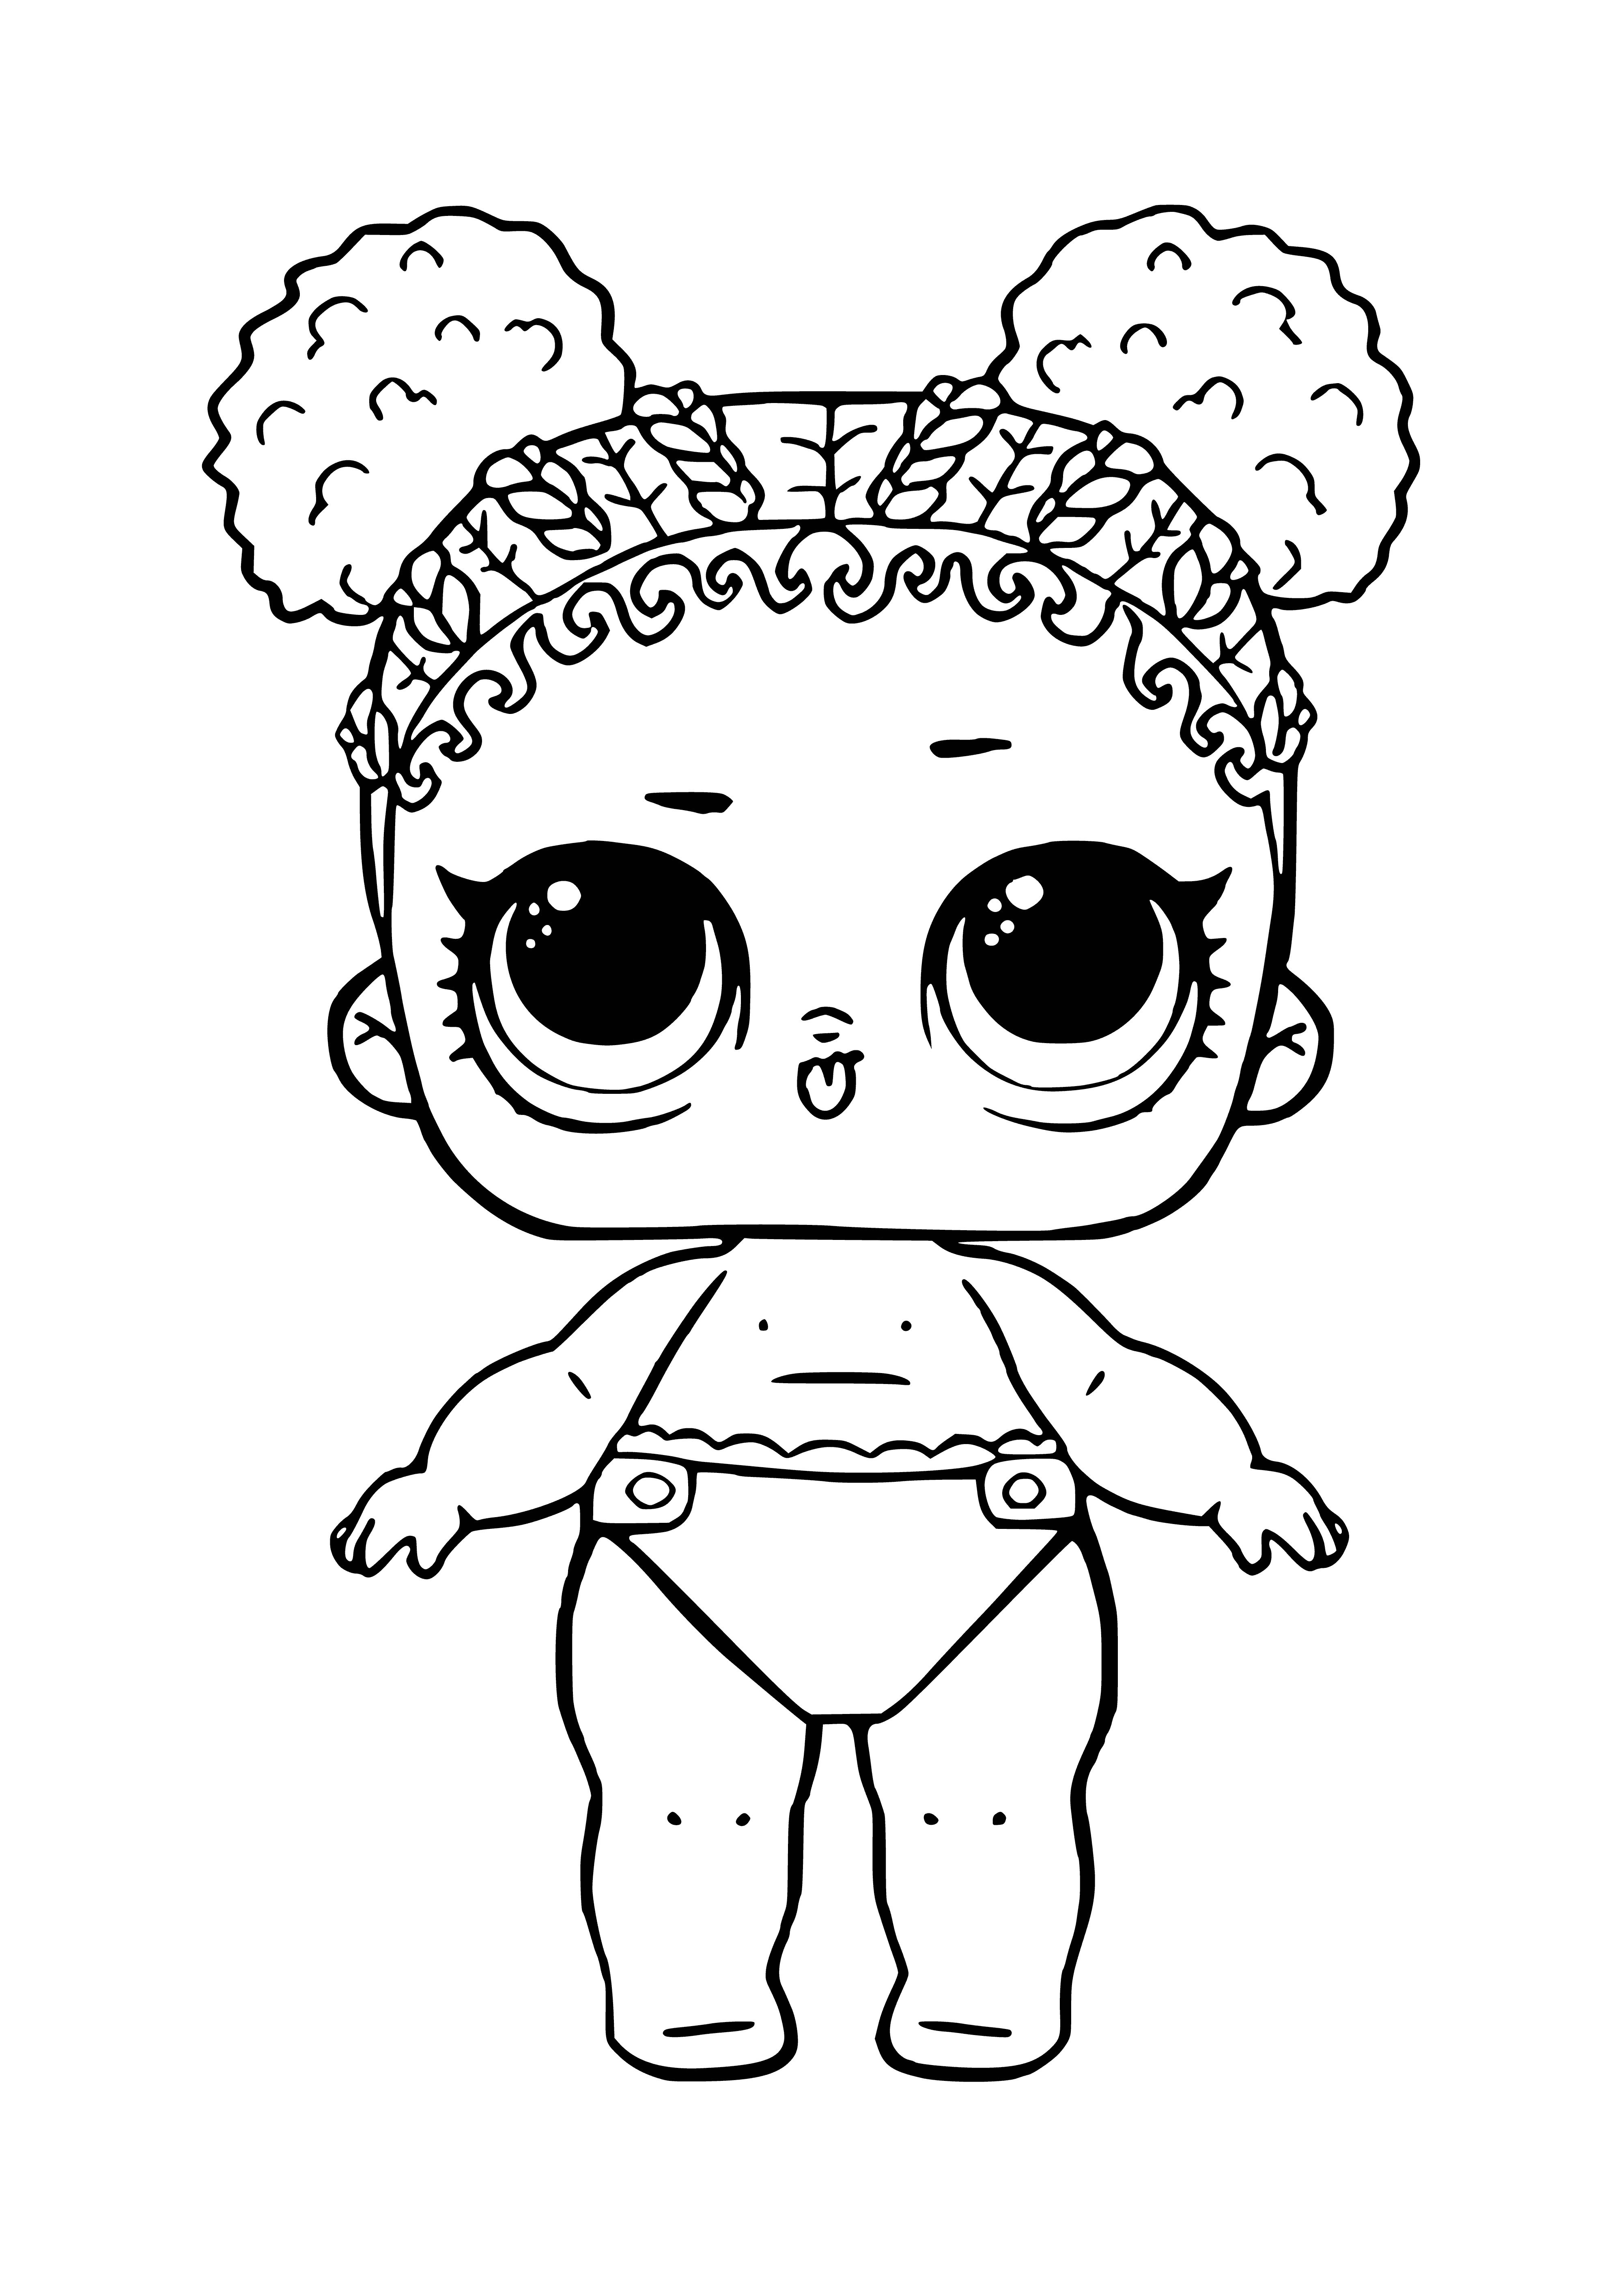 coloring page: Baby in flower-covered onesie looking at camera with happy expression. #cutenessoverload